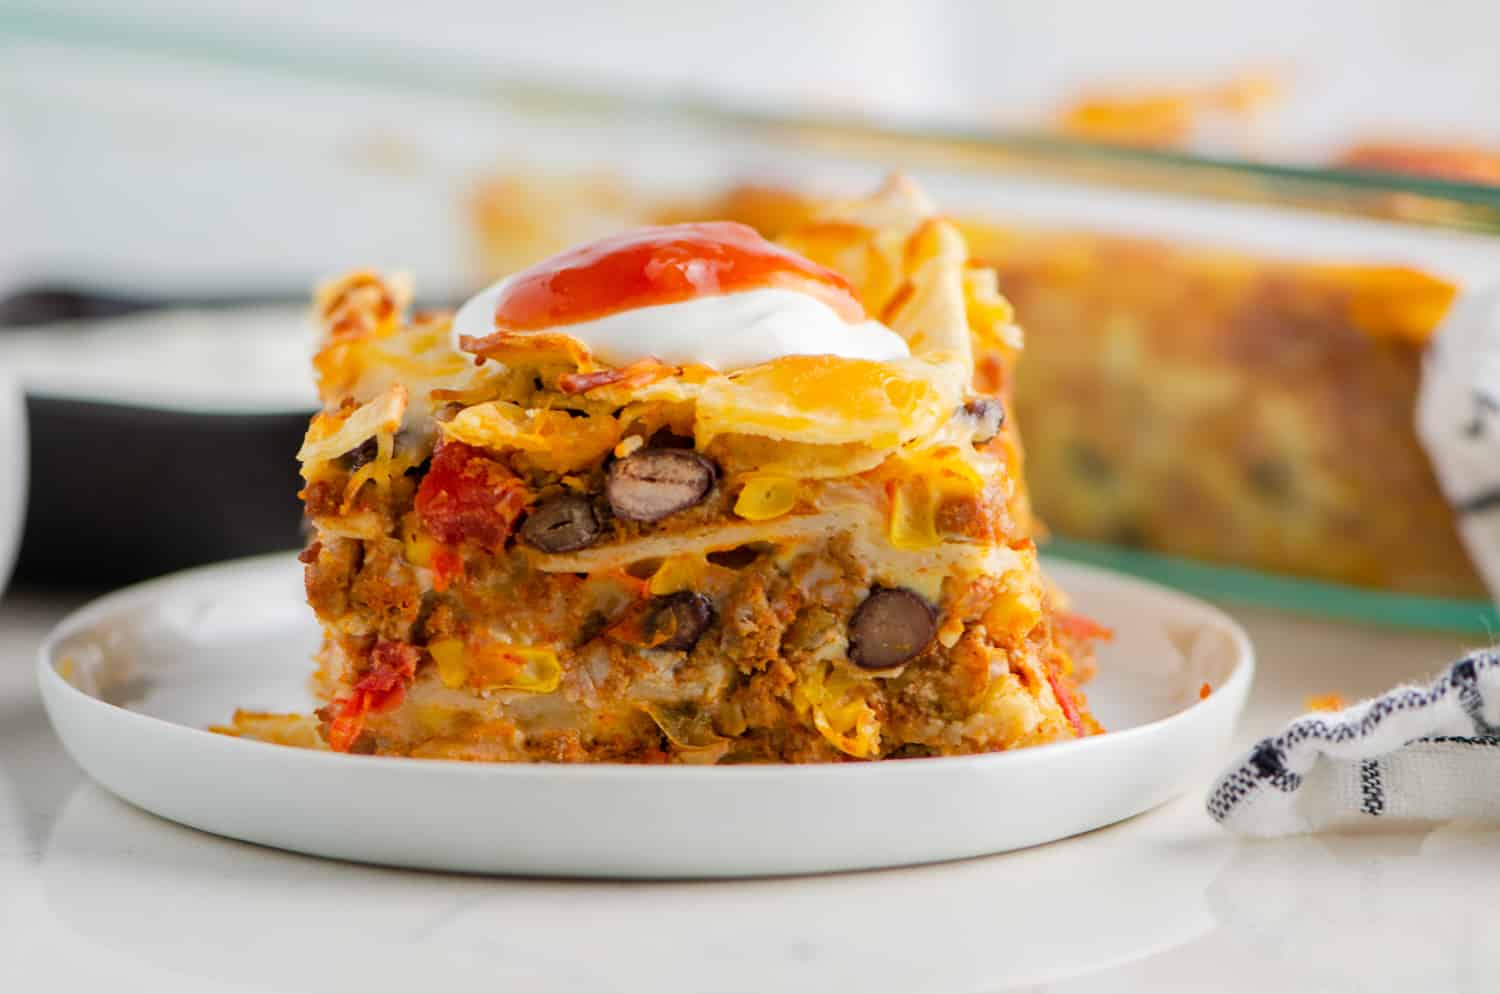 Breakfast Casserole with tortillas, eggs, cheese, and chorizo.